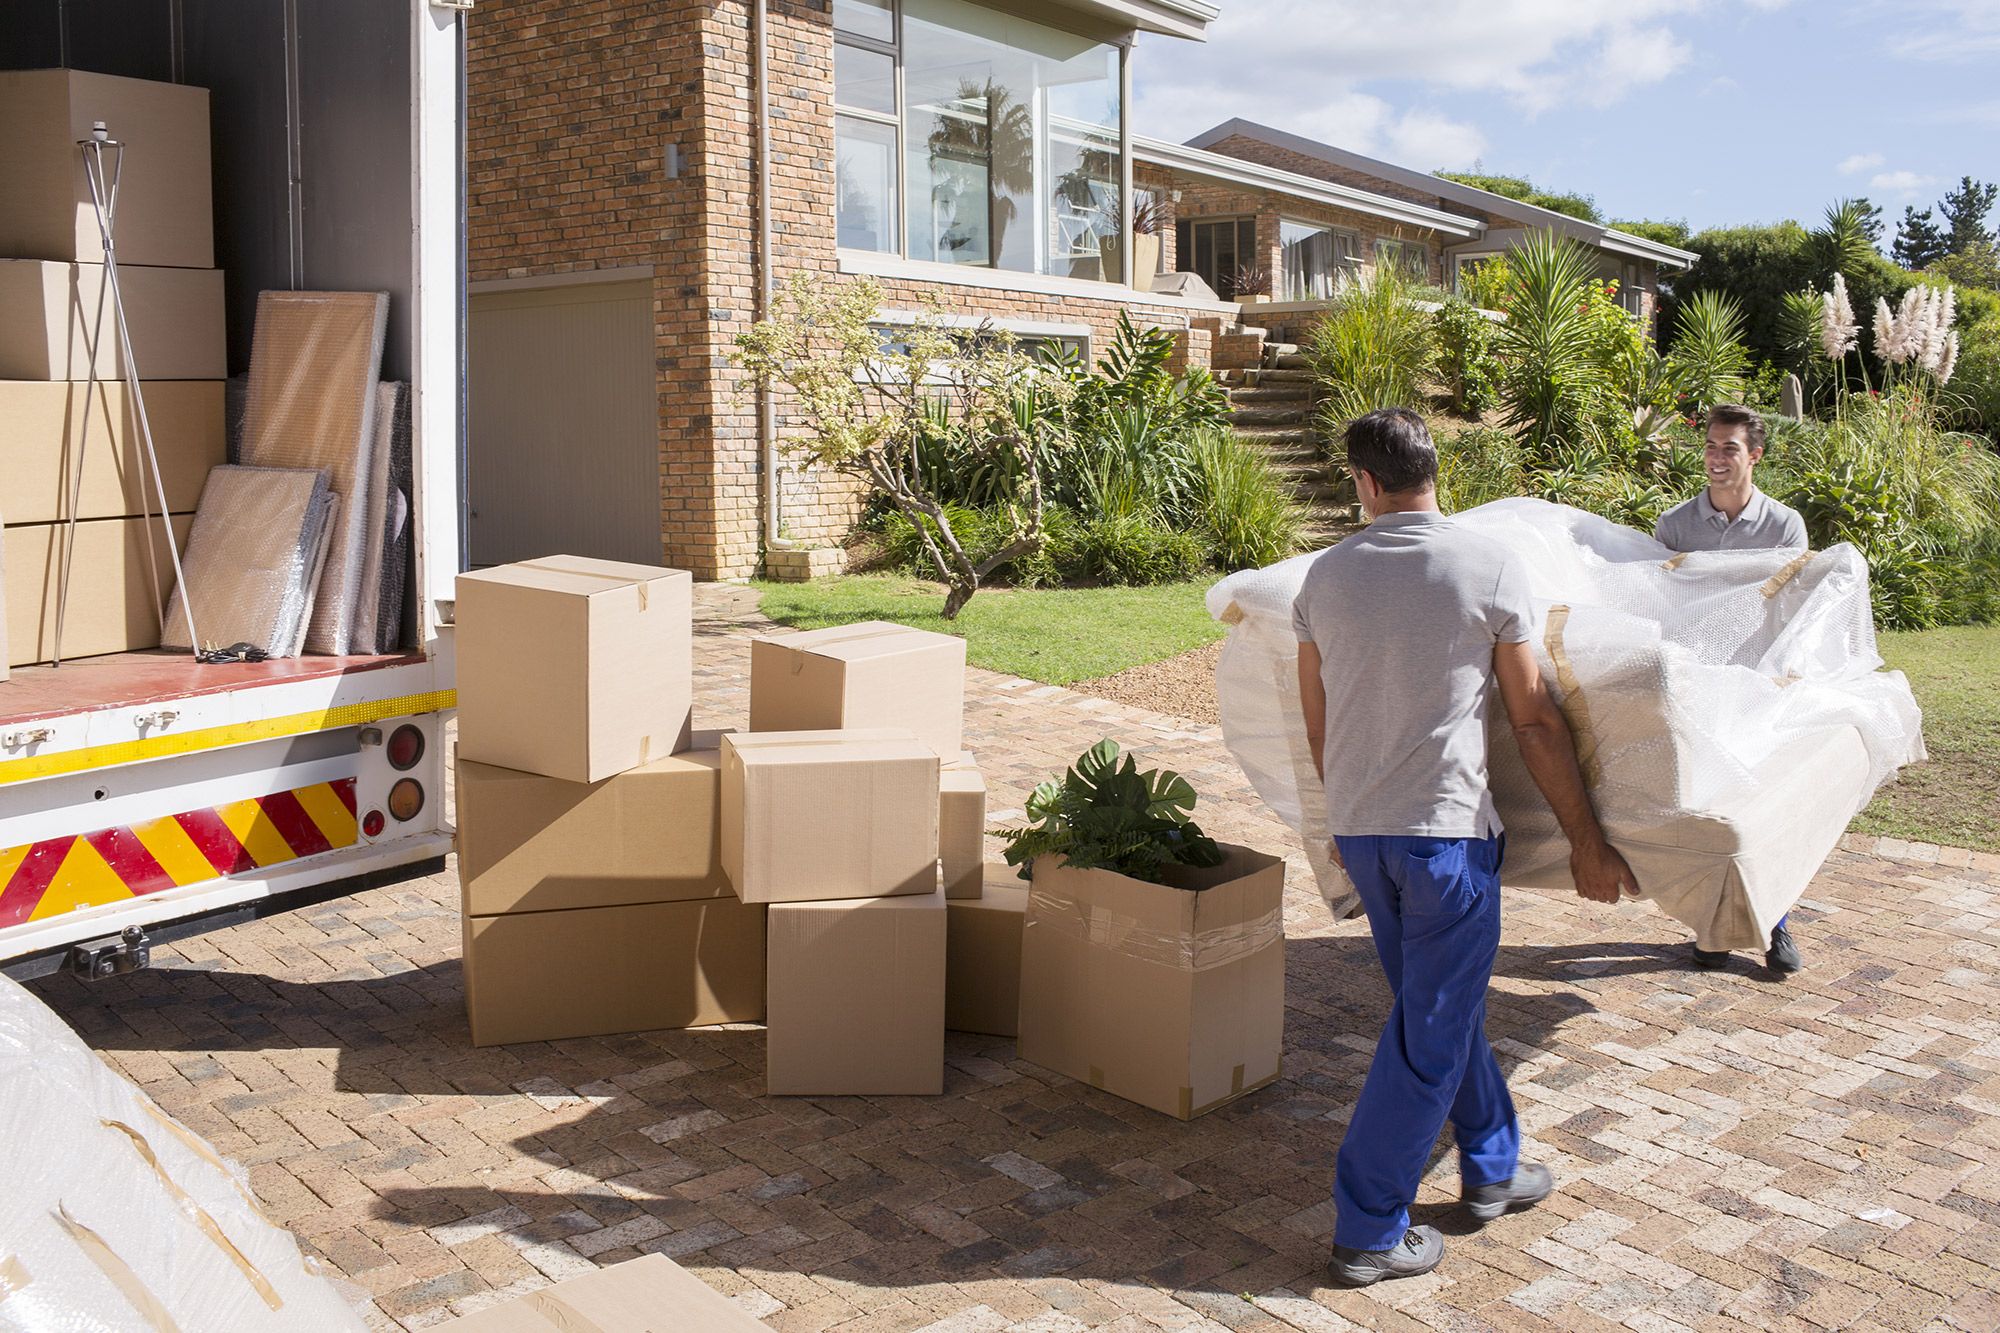 Fordson Movers - Expert & Affordable Moving Company in MI